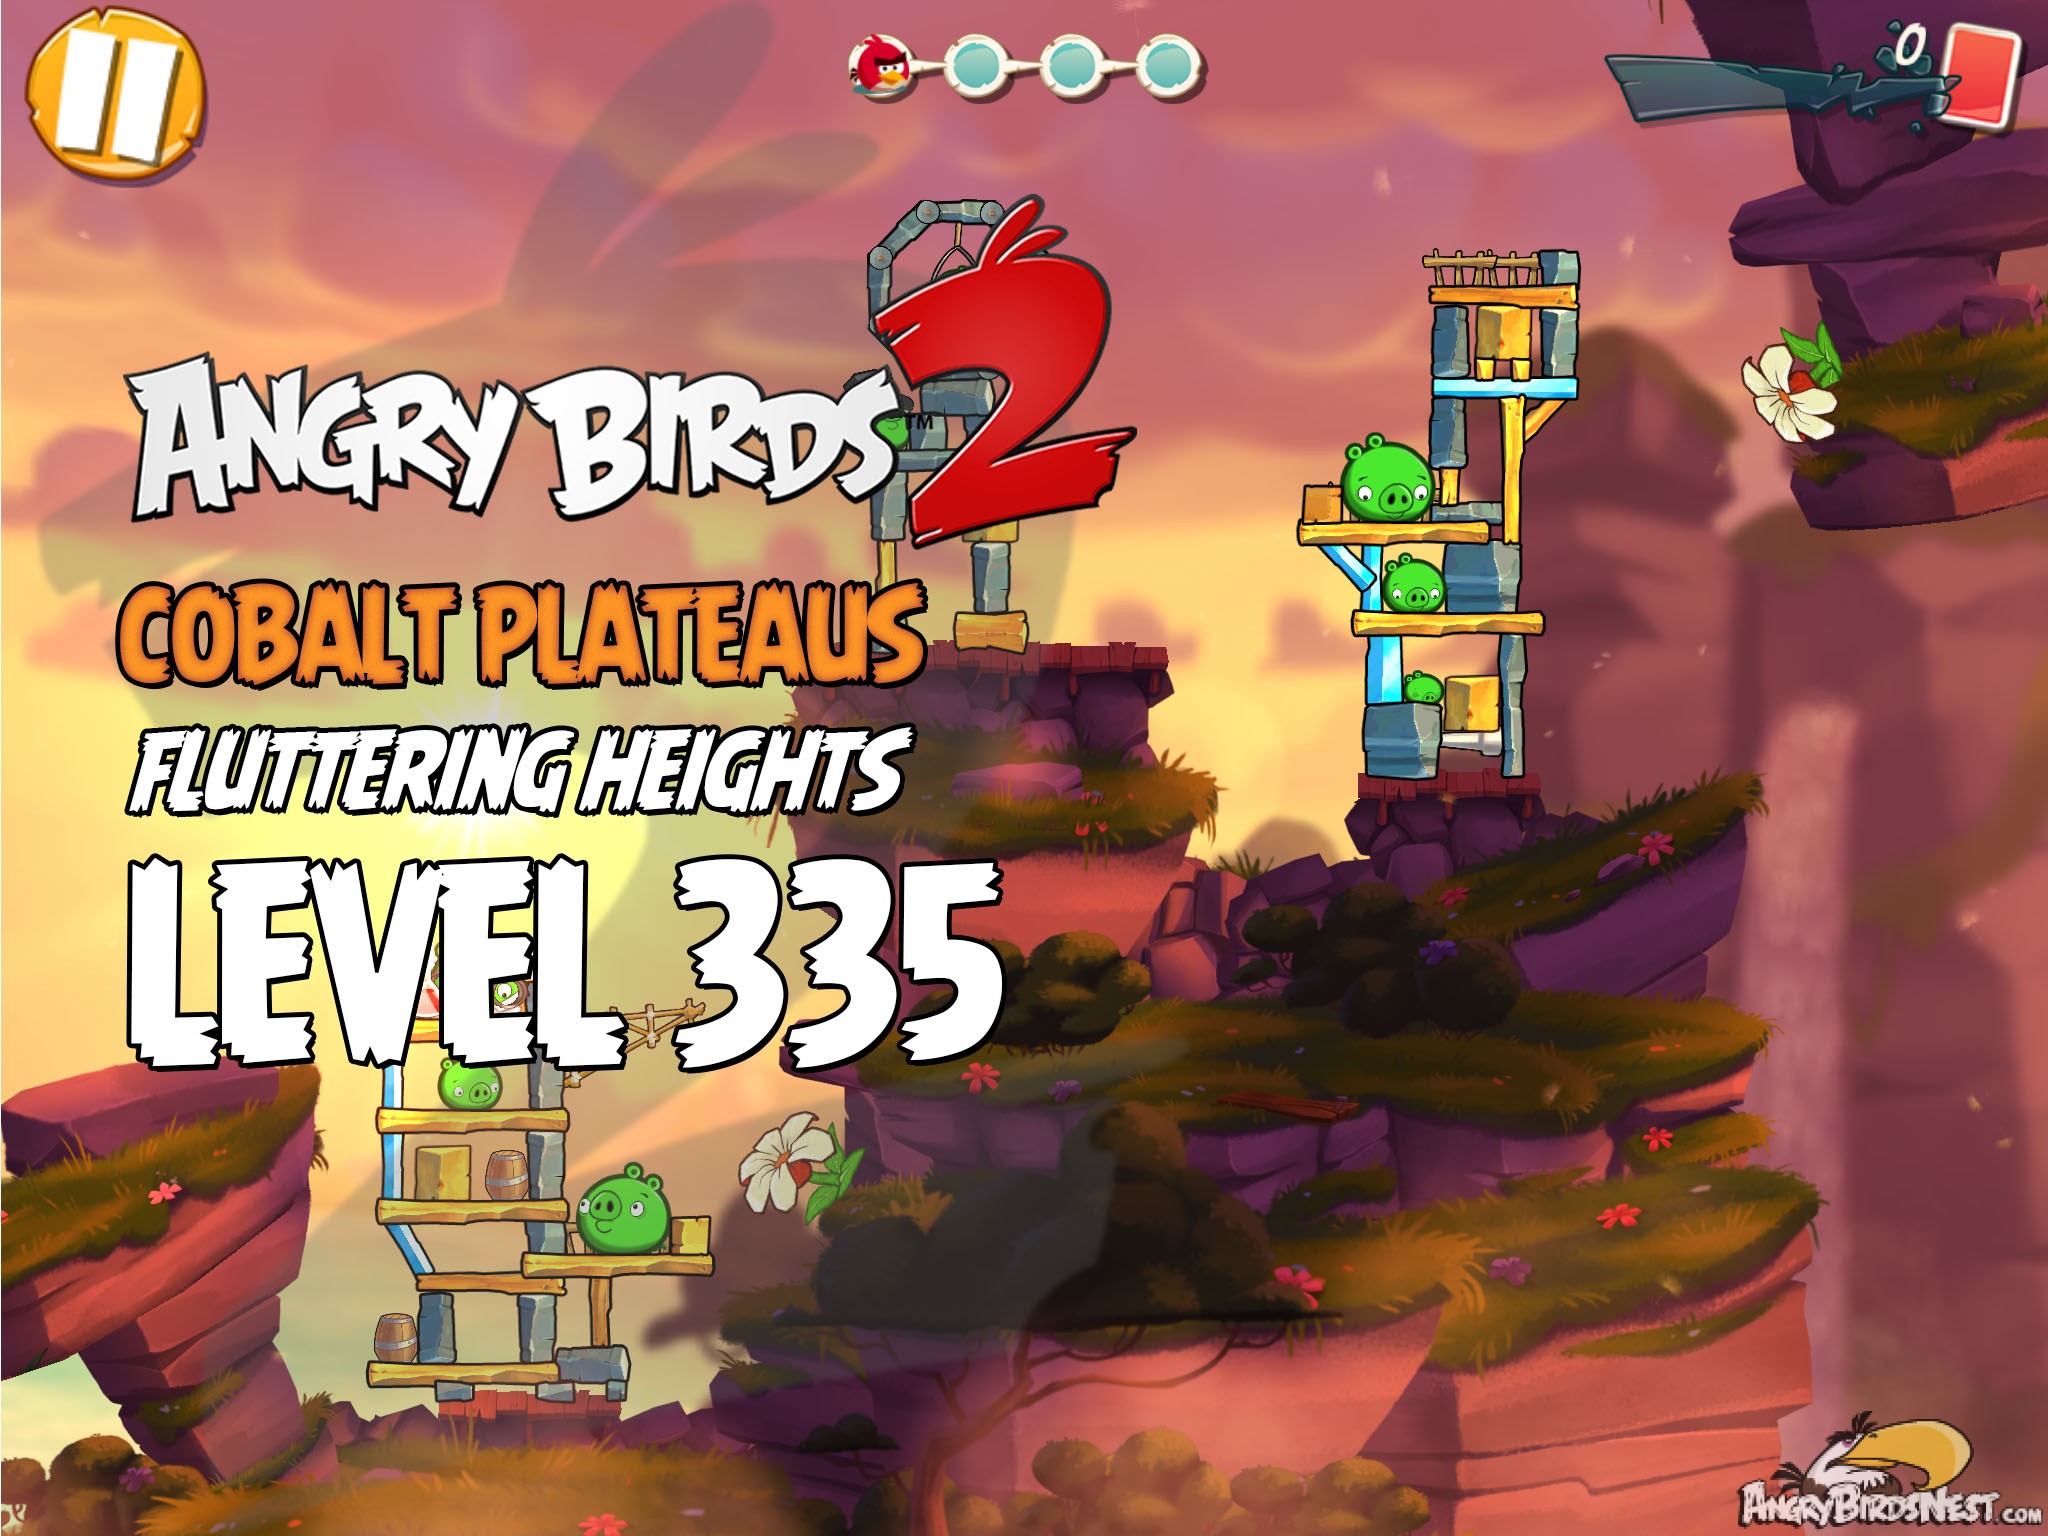 Angry Birds 2 Level 335 Cobalt Plateaus Fluttering Heights Image